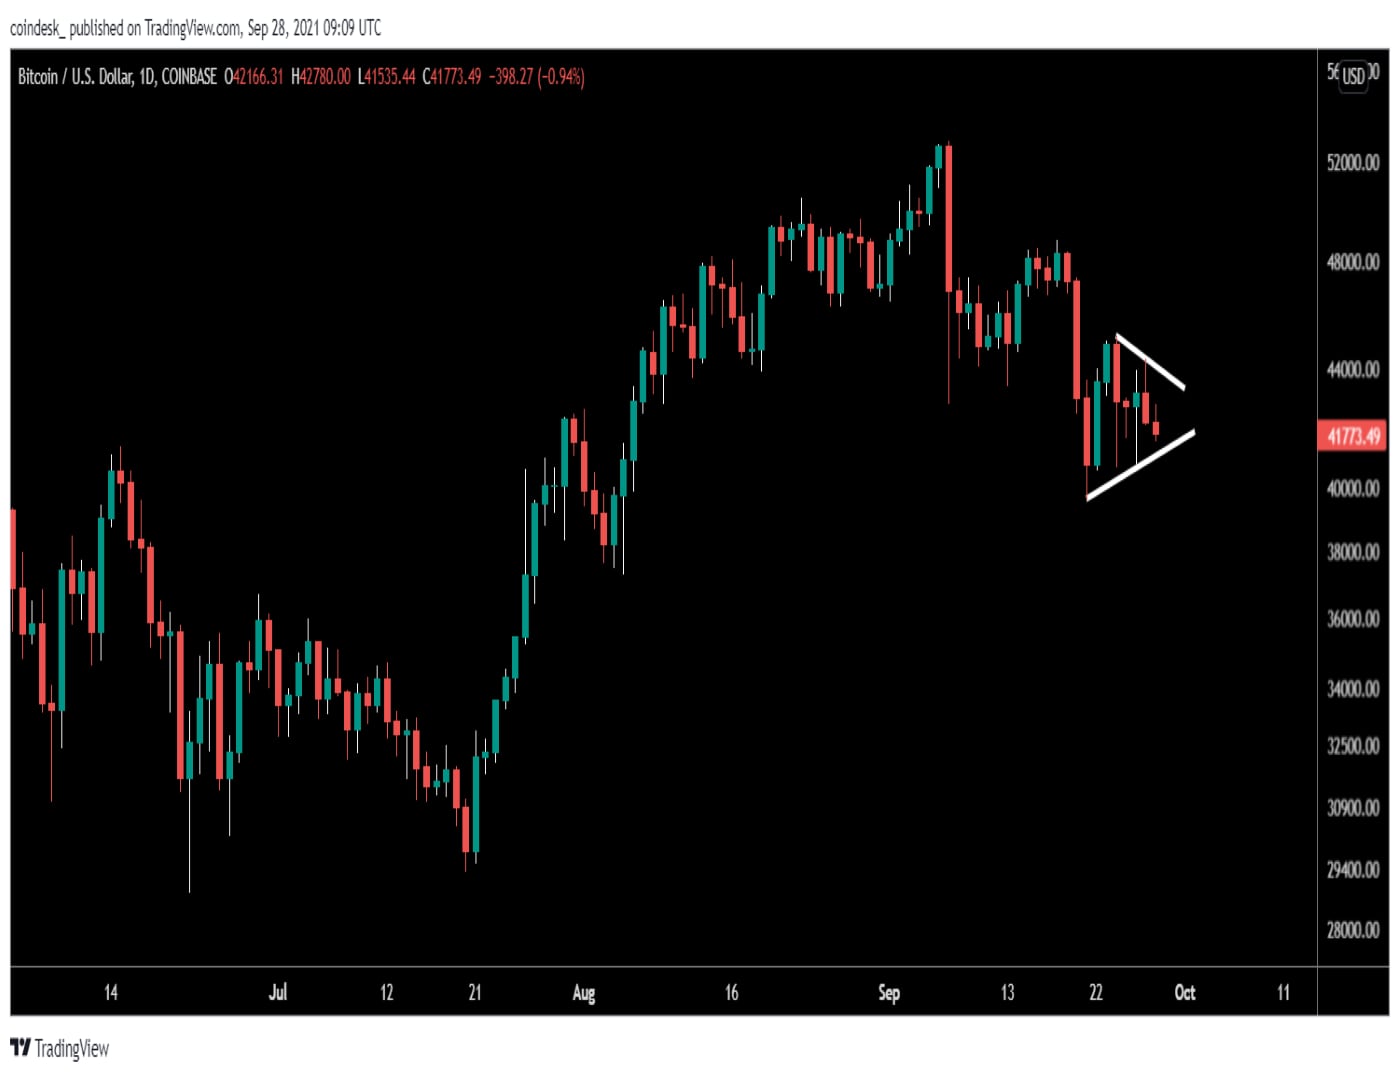 BTC trapped in a narrowing price range